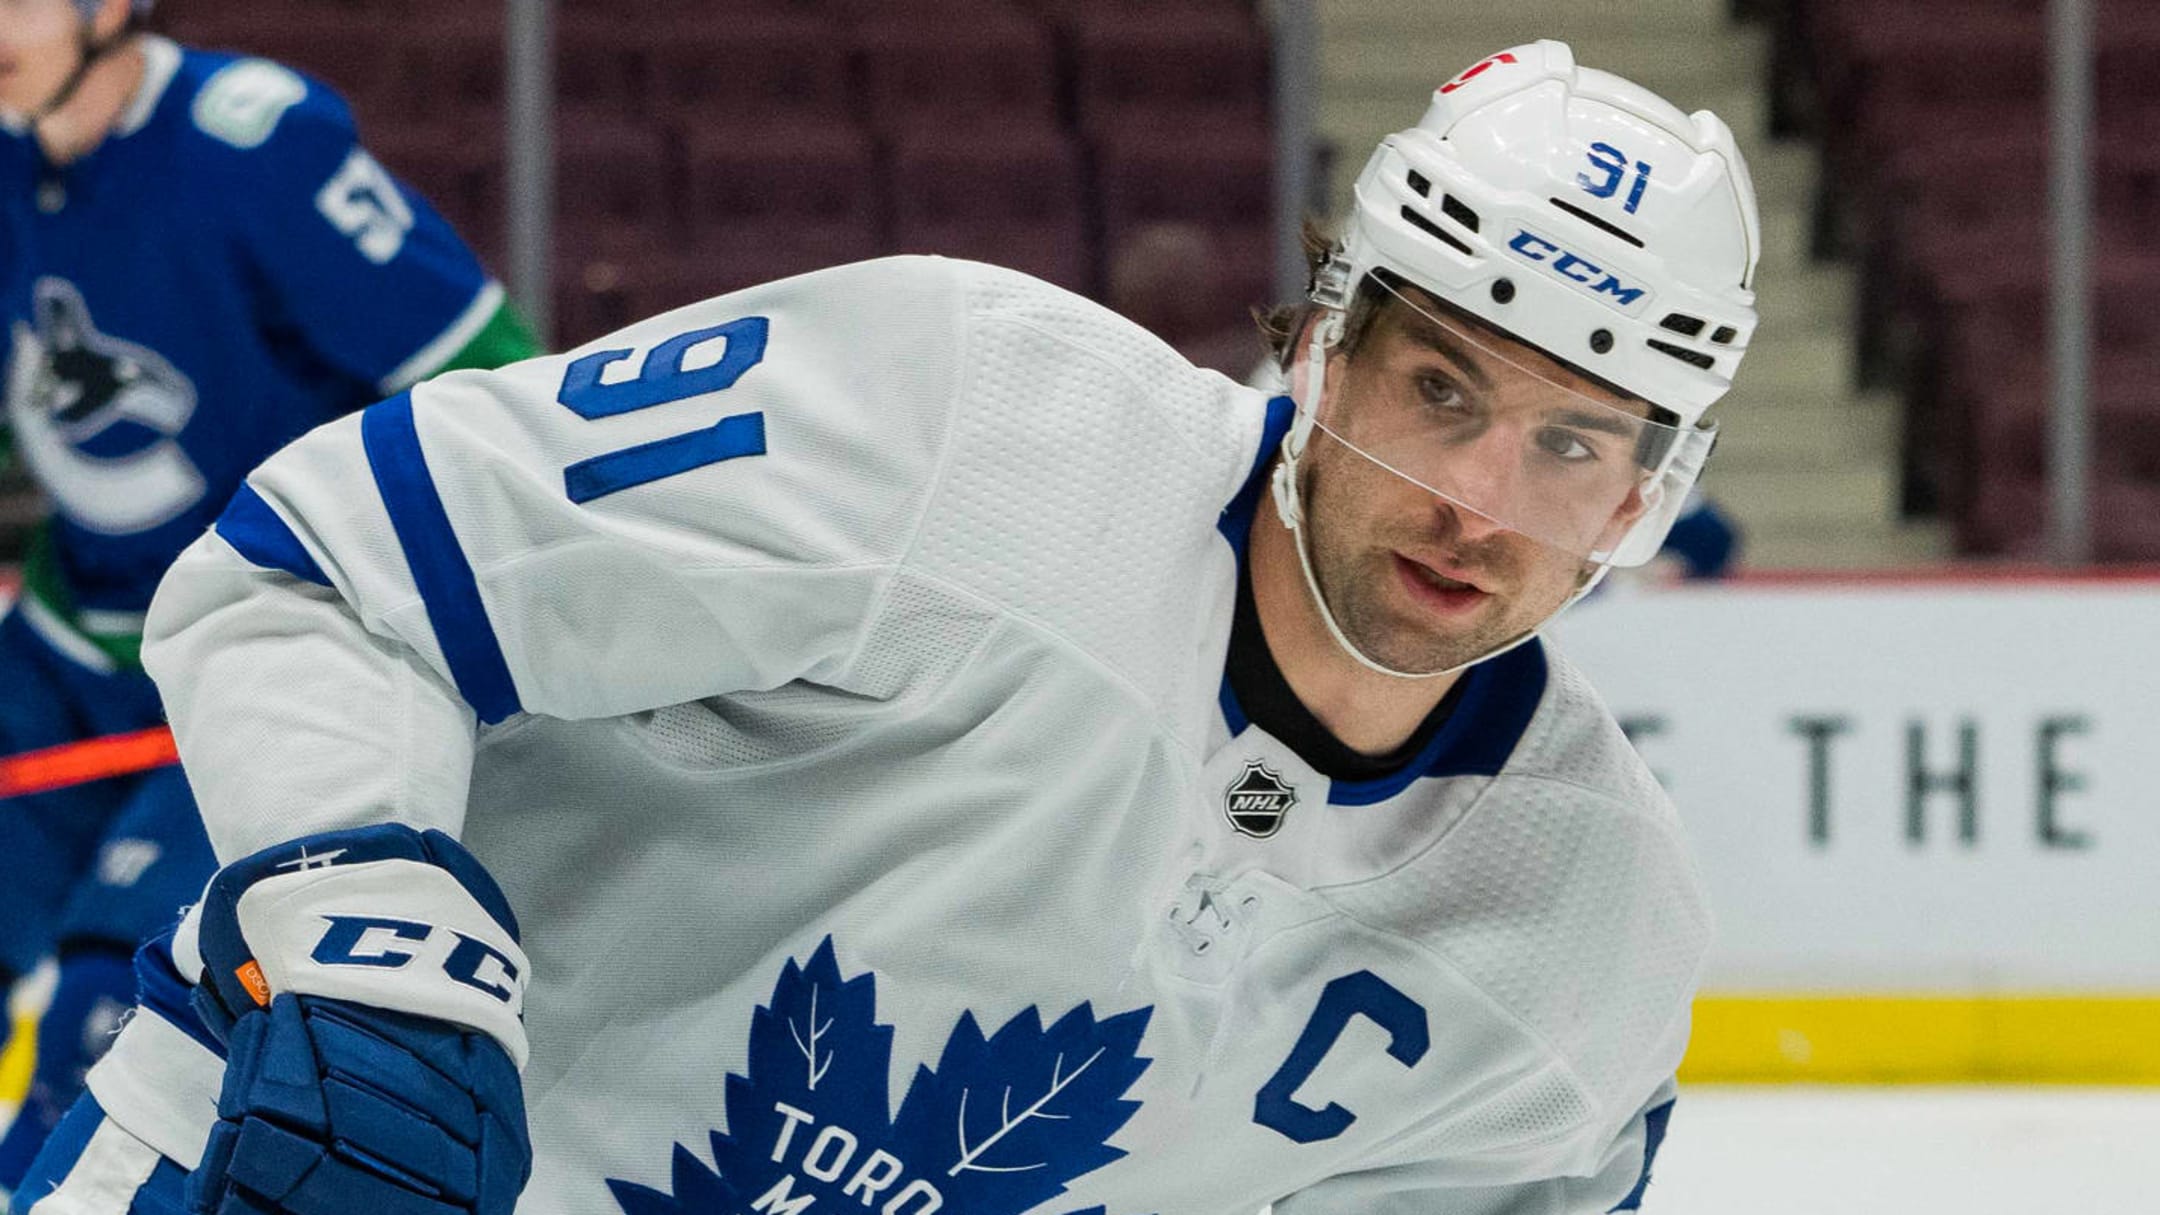 Leafs' John Tavares also injured knee, out at least 2 weeks